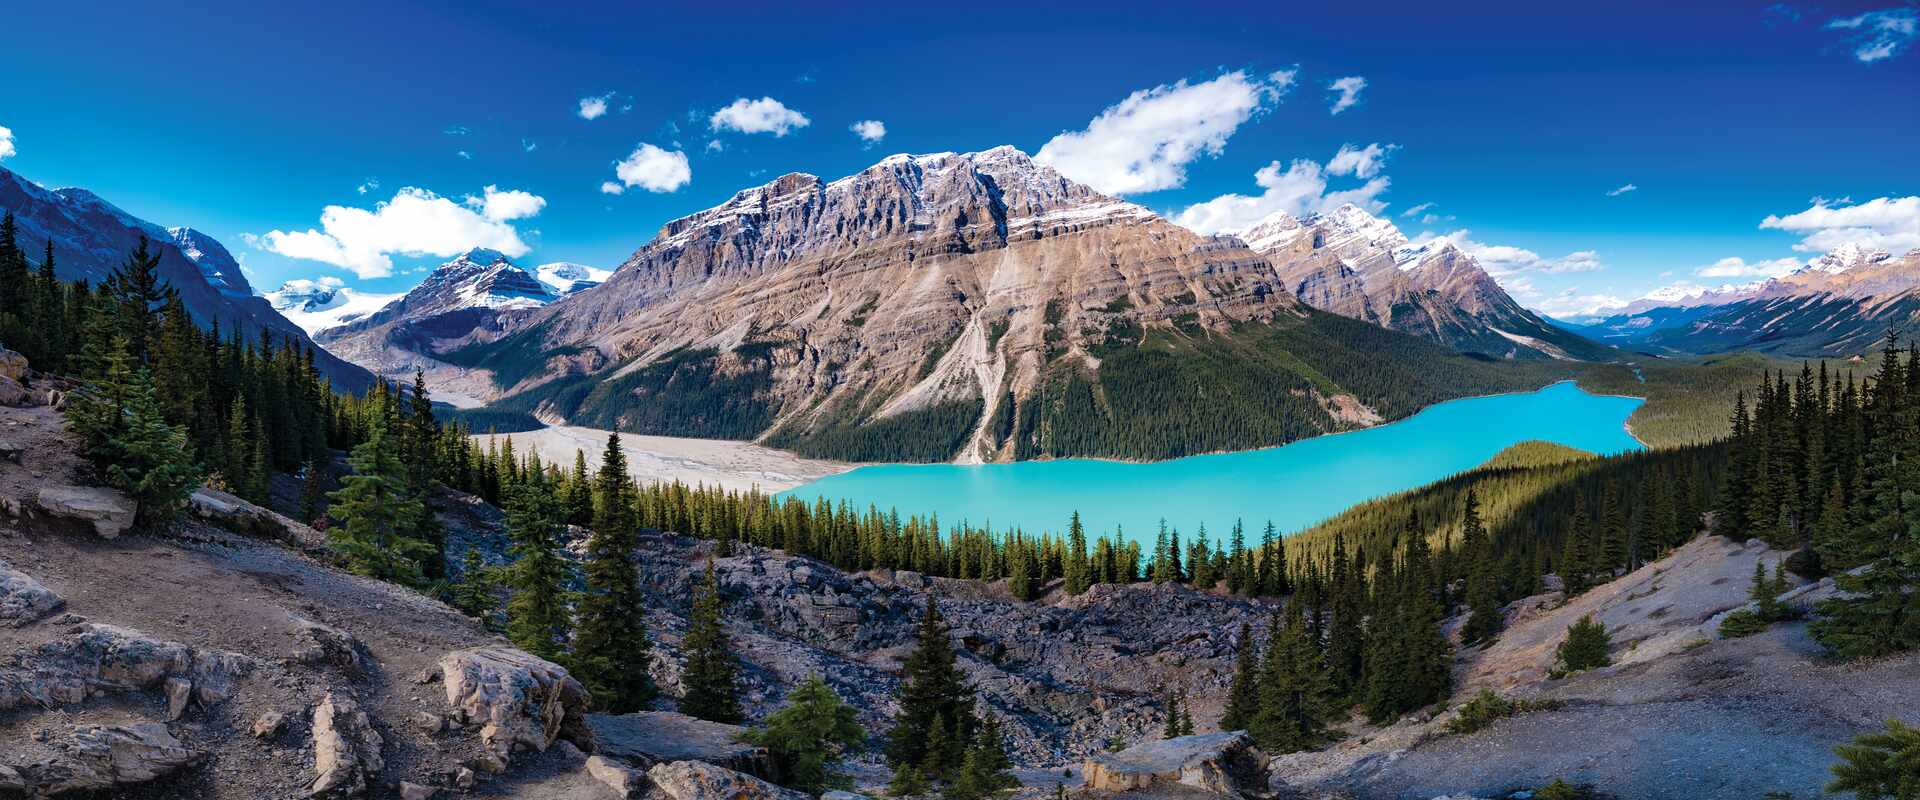 Lake Peyto with mountains in the background in Alberta, Canada